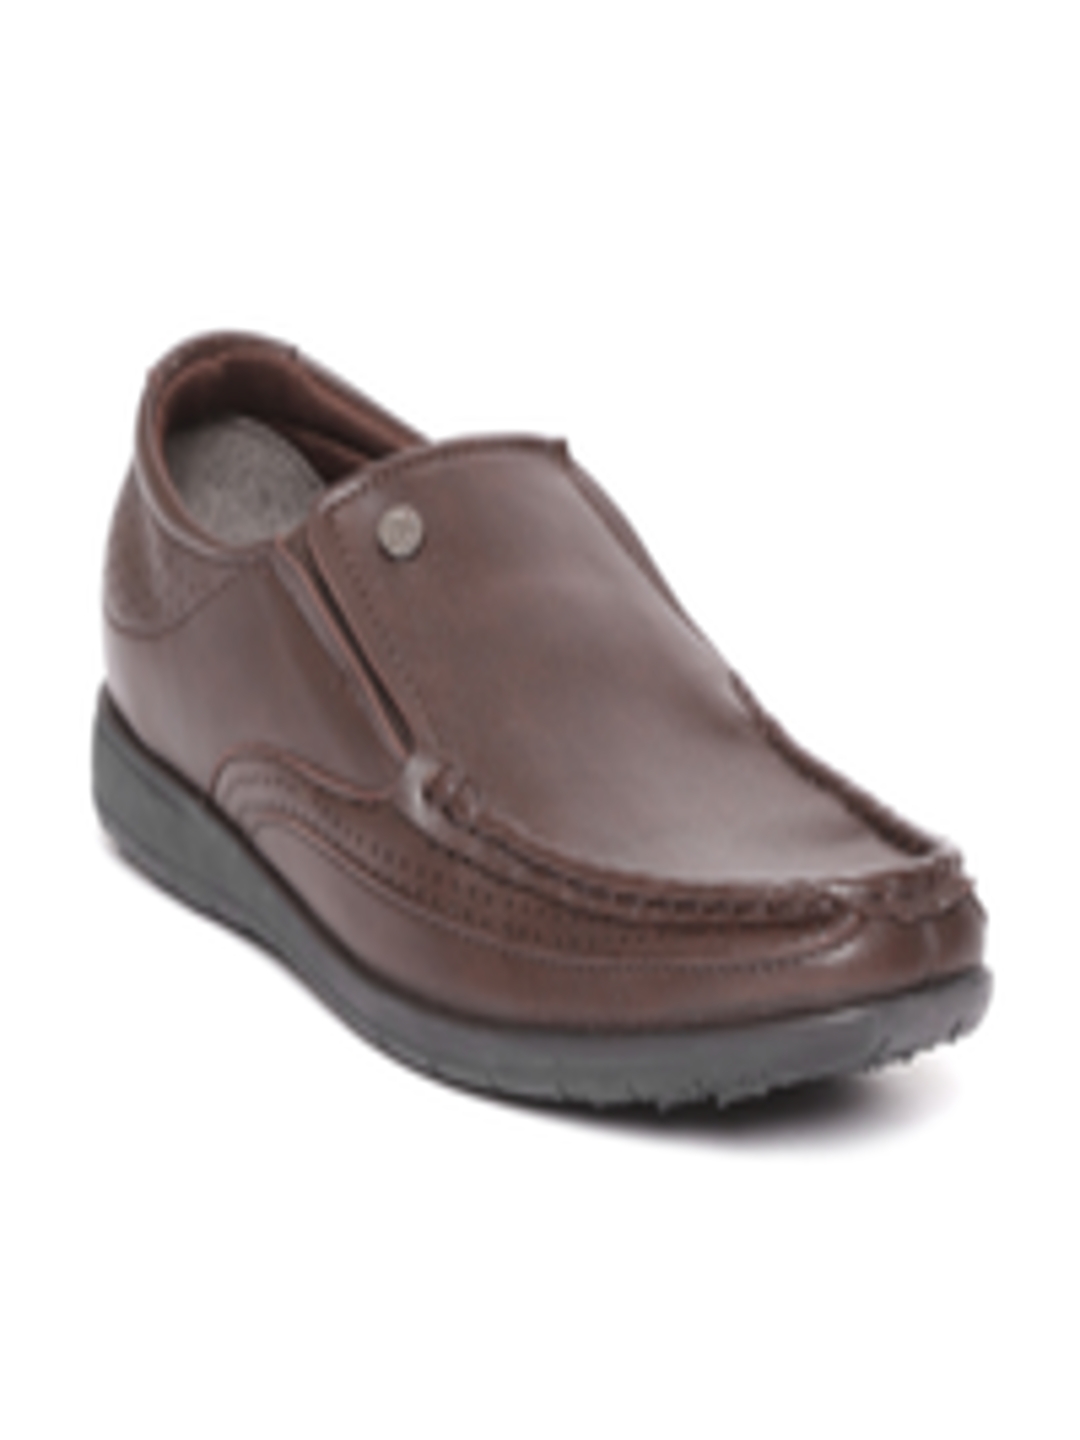 Buy Duke Men Coffee Brown Loafers - Casual Shoes for Men 9105237 | Myntra